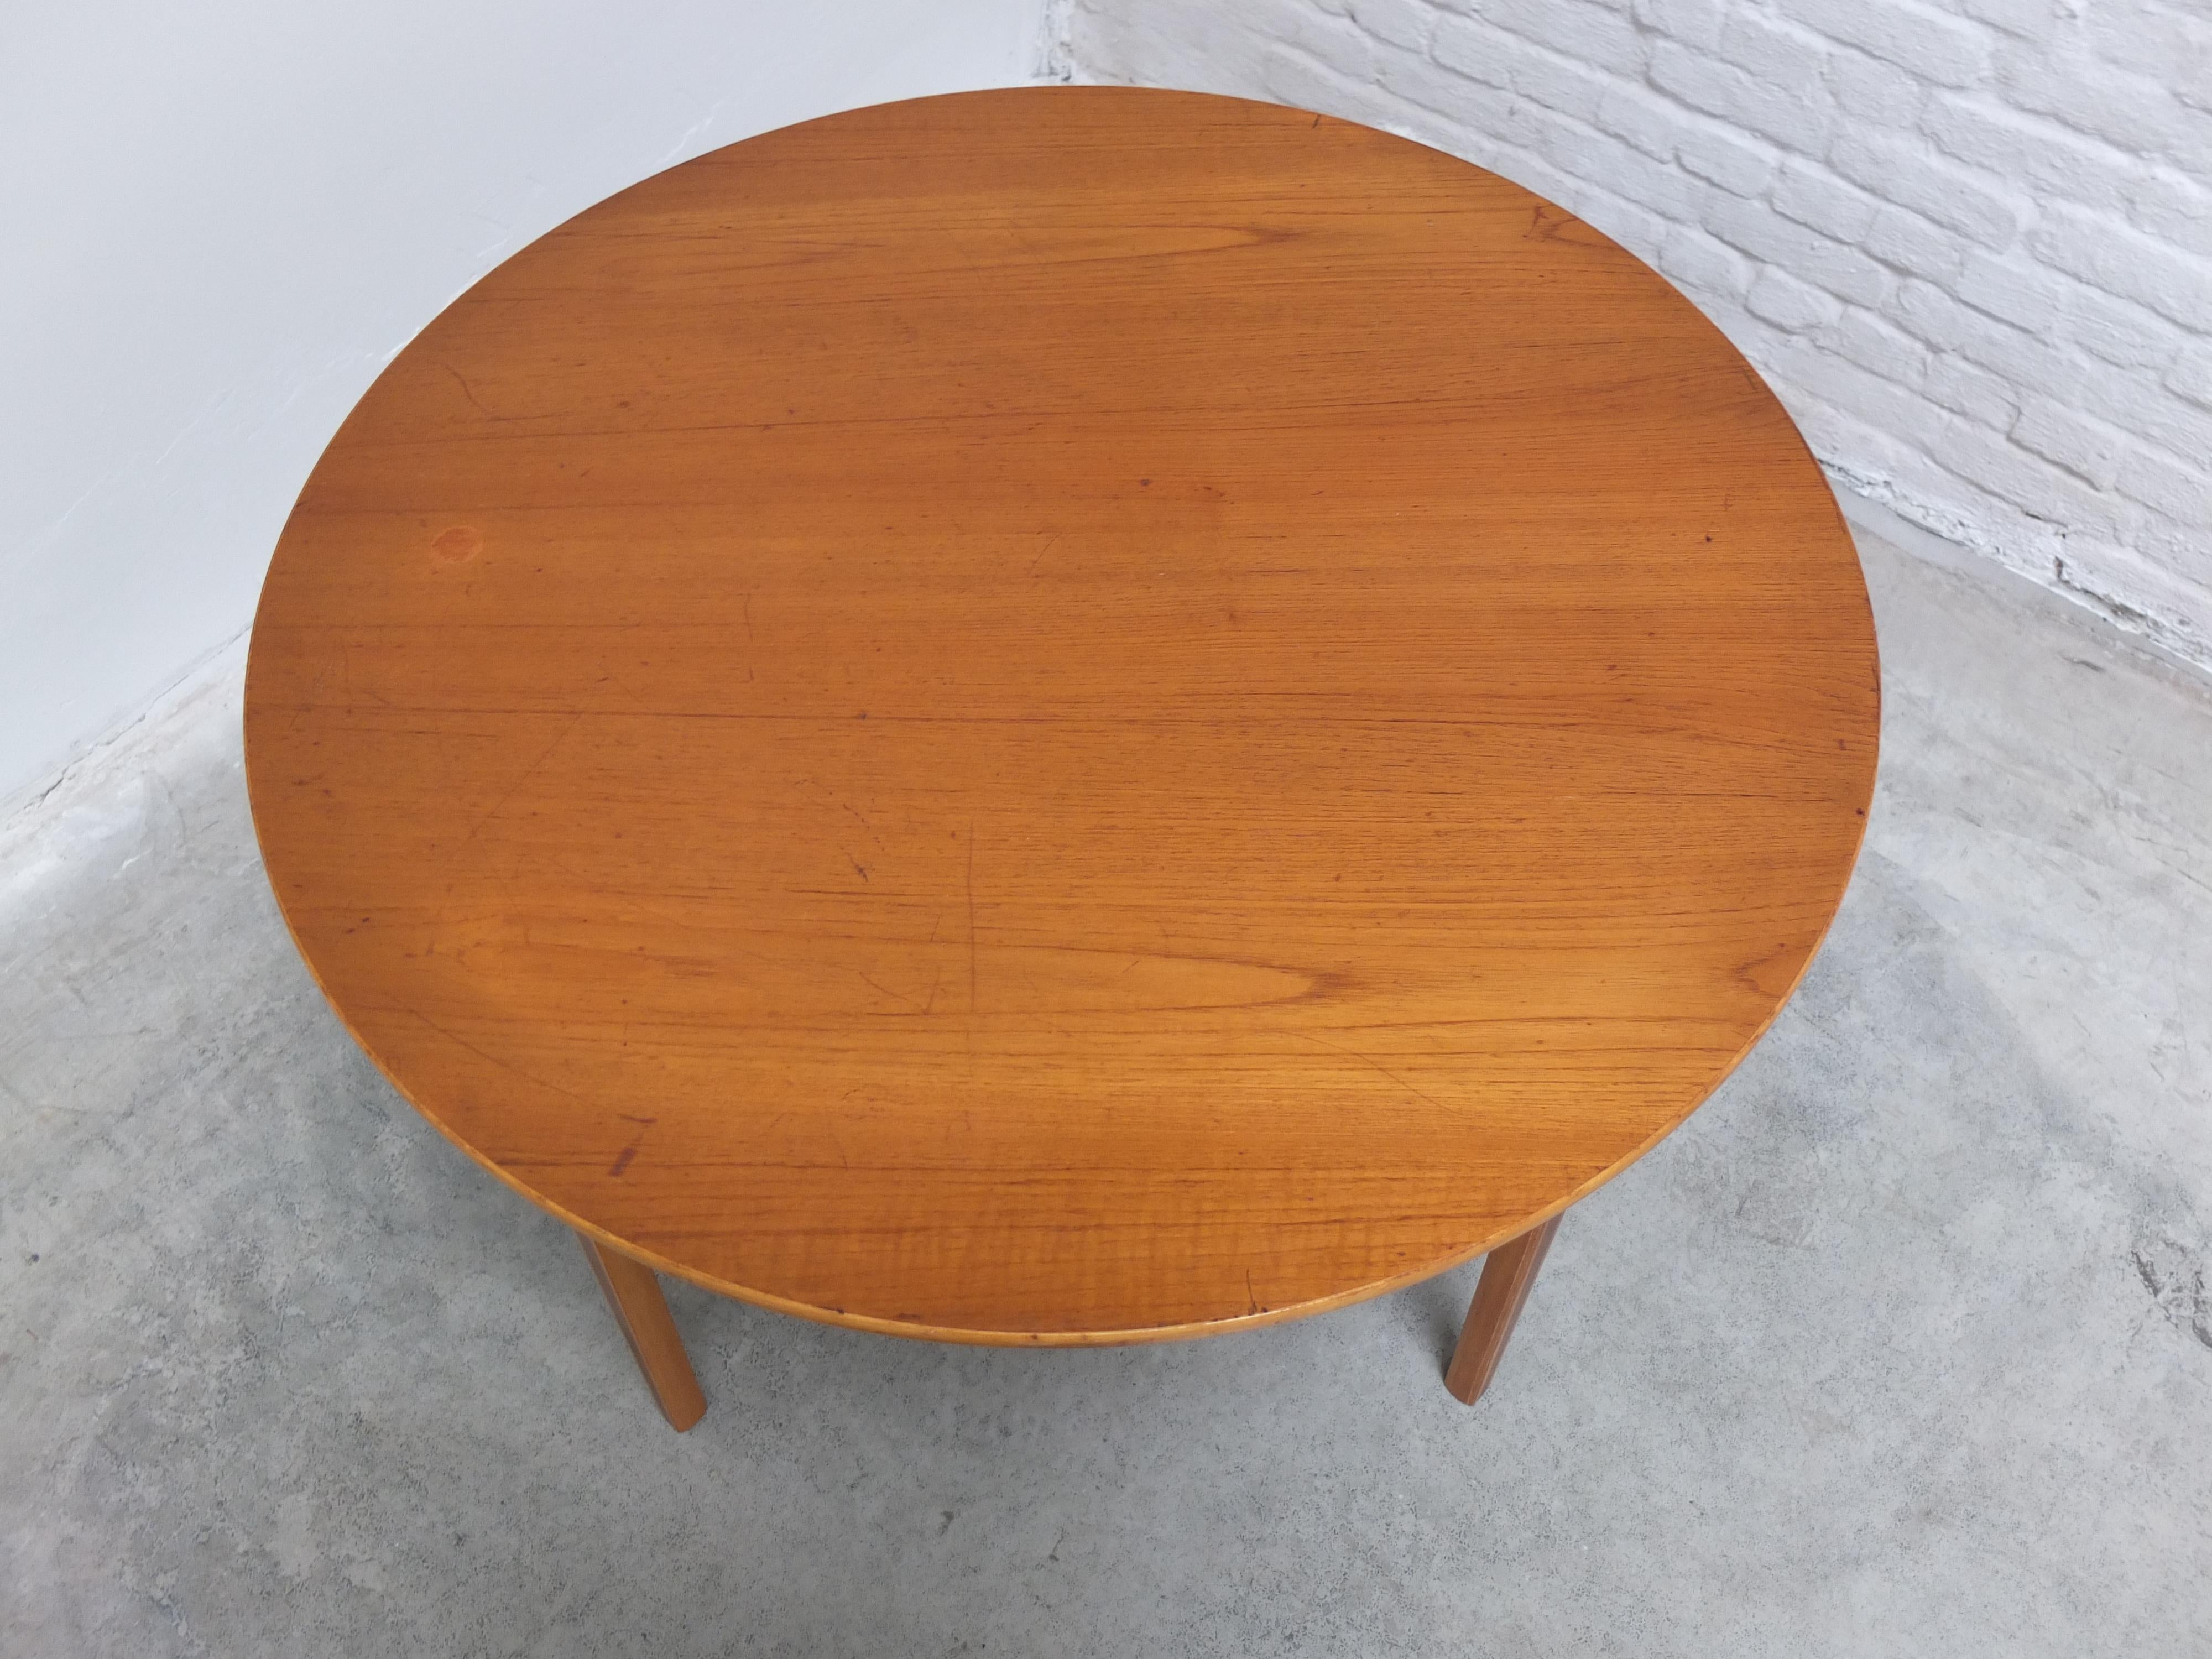 Rare 'AX' Coffee Table by Peter Hvidt & Orla Mølgaard for Fritz Hansen, 1951 For Sale 6